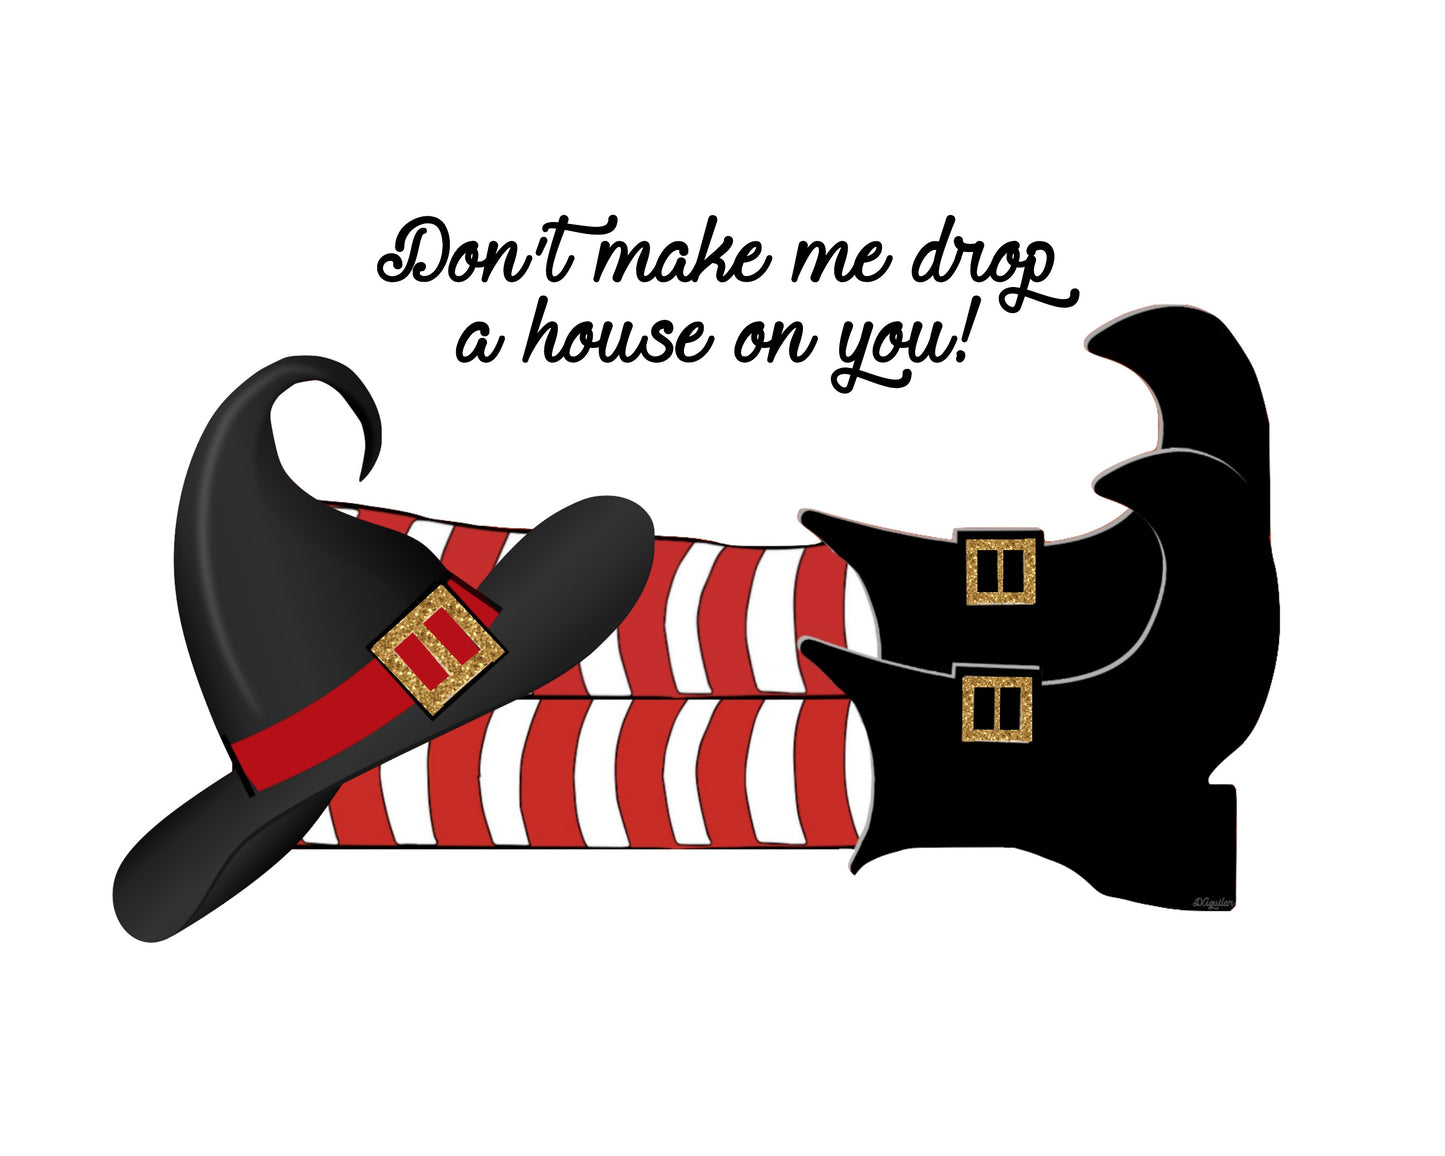 "Don't Make Me Drop A House On You" Wizard of Oz Wicked Witch Humor 8x10 Print